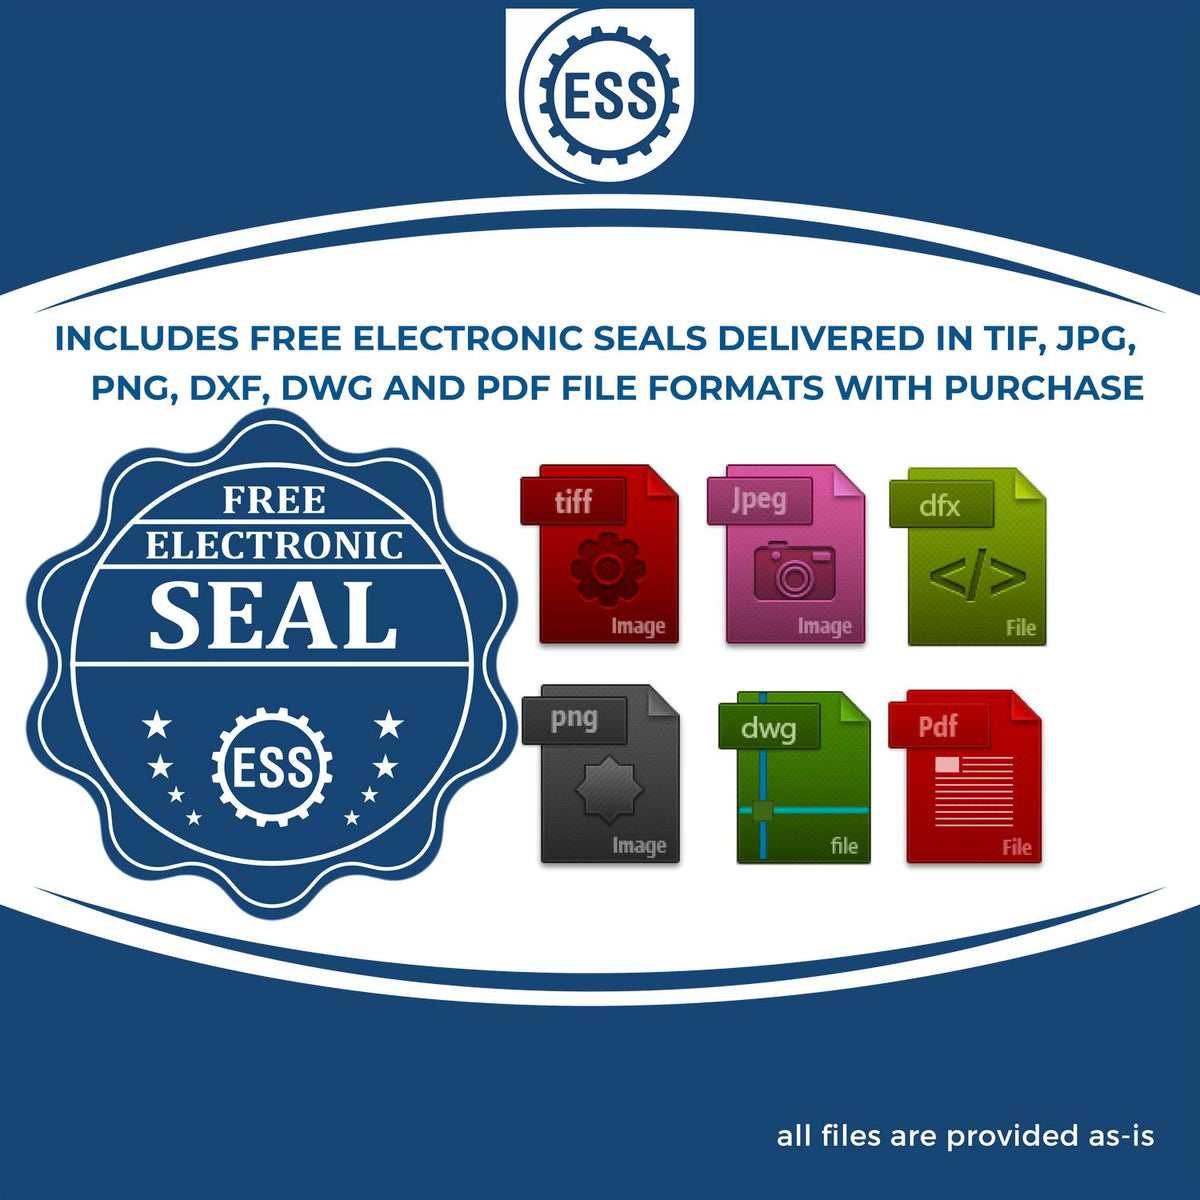 An infographic for the free electronic seal for the Soft New Jersey Professional Geologist Seal illustrating the different file type icons such as DXF, DWG, TIF, JPG and PNG.